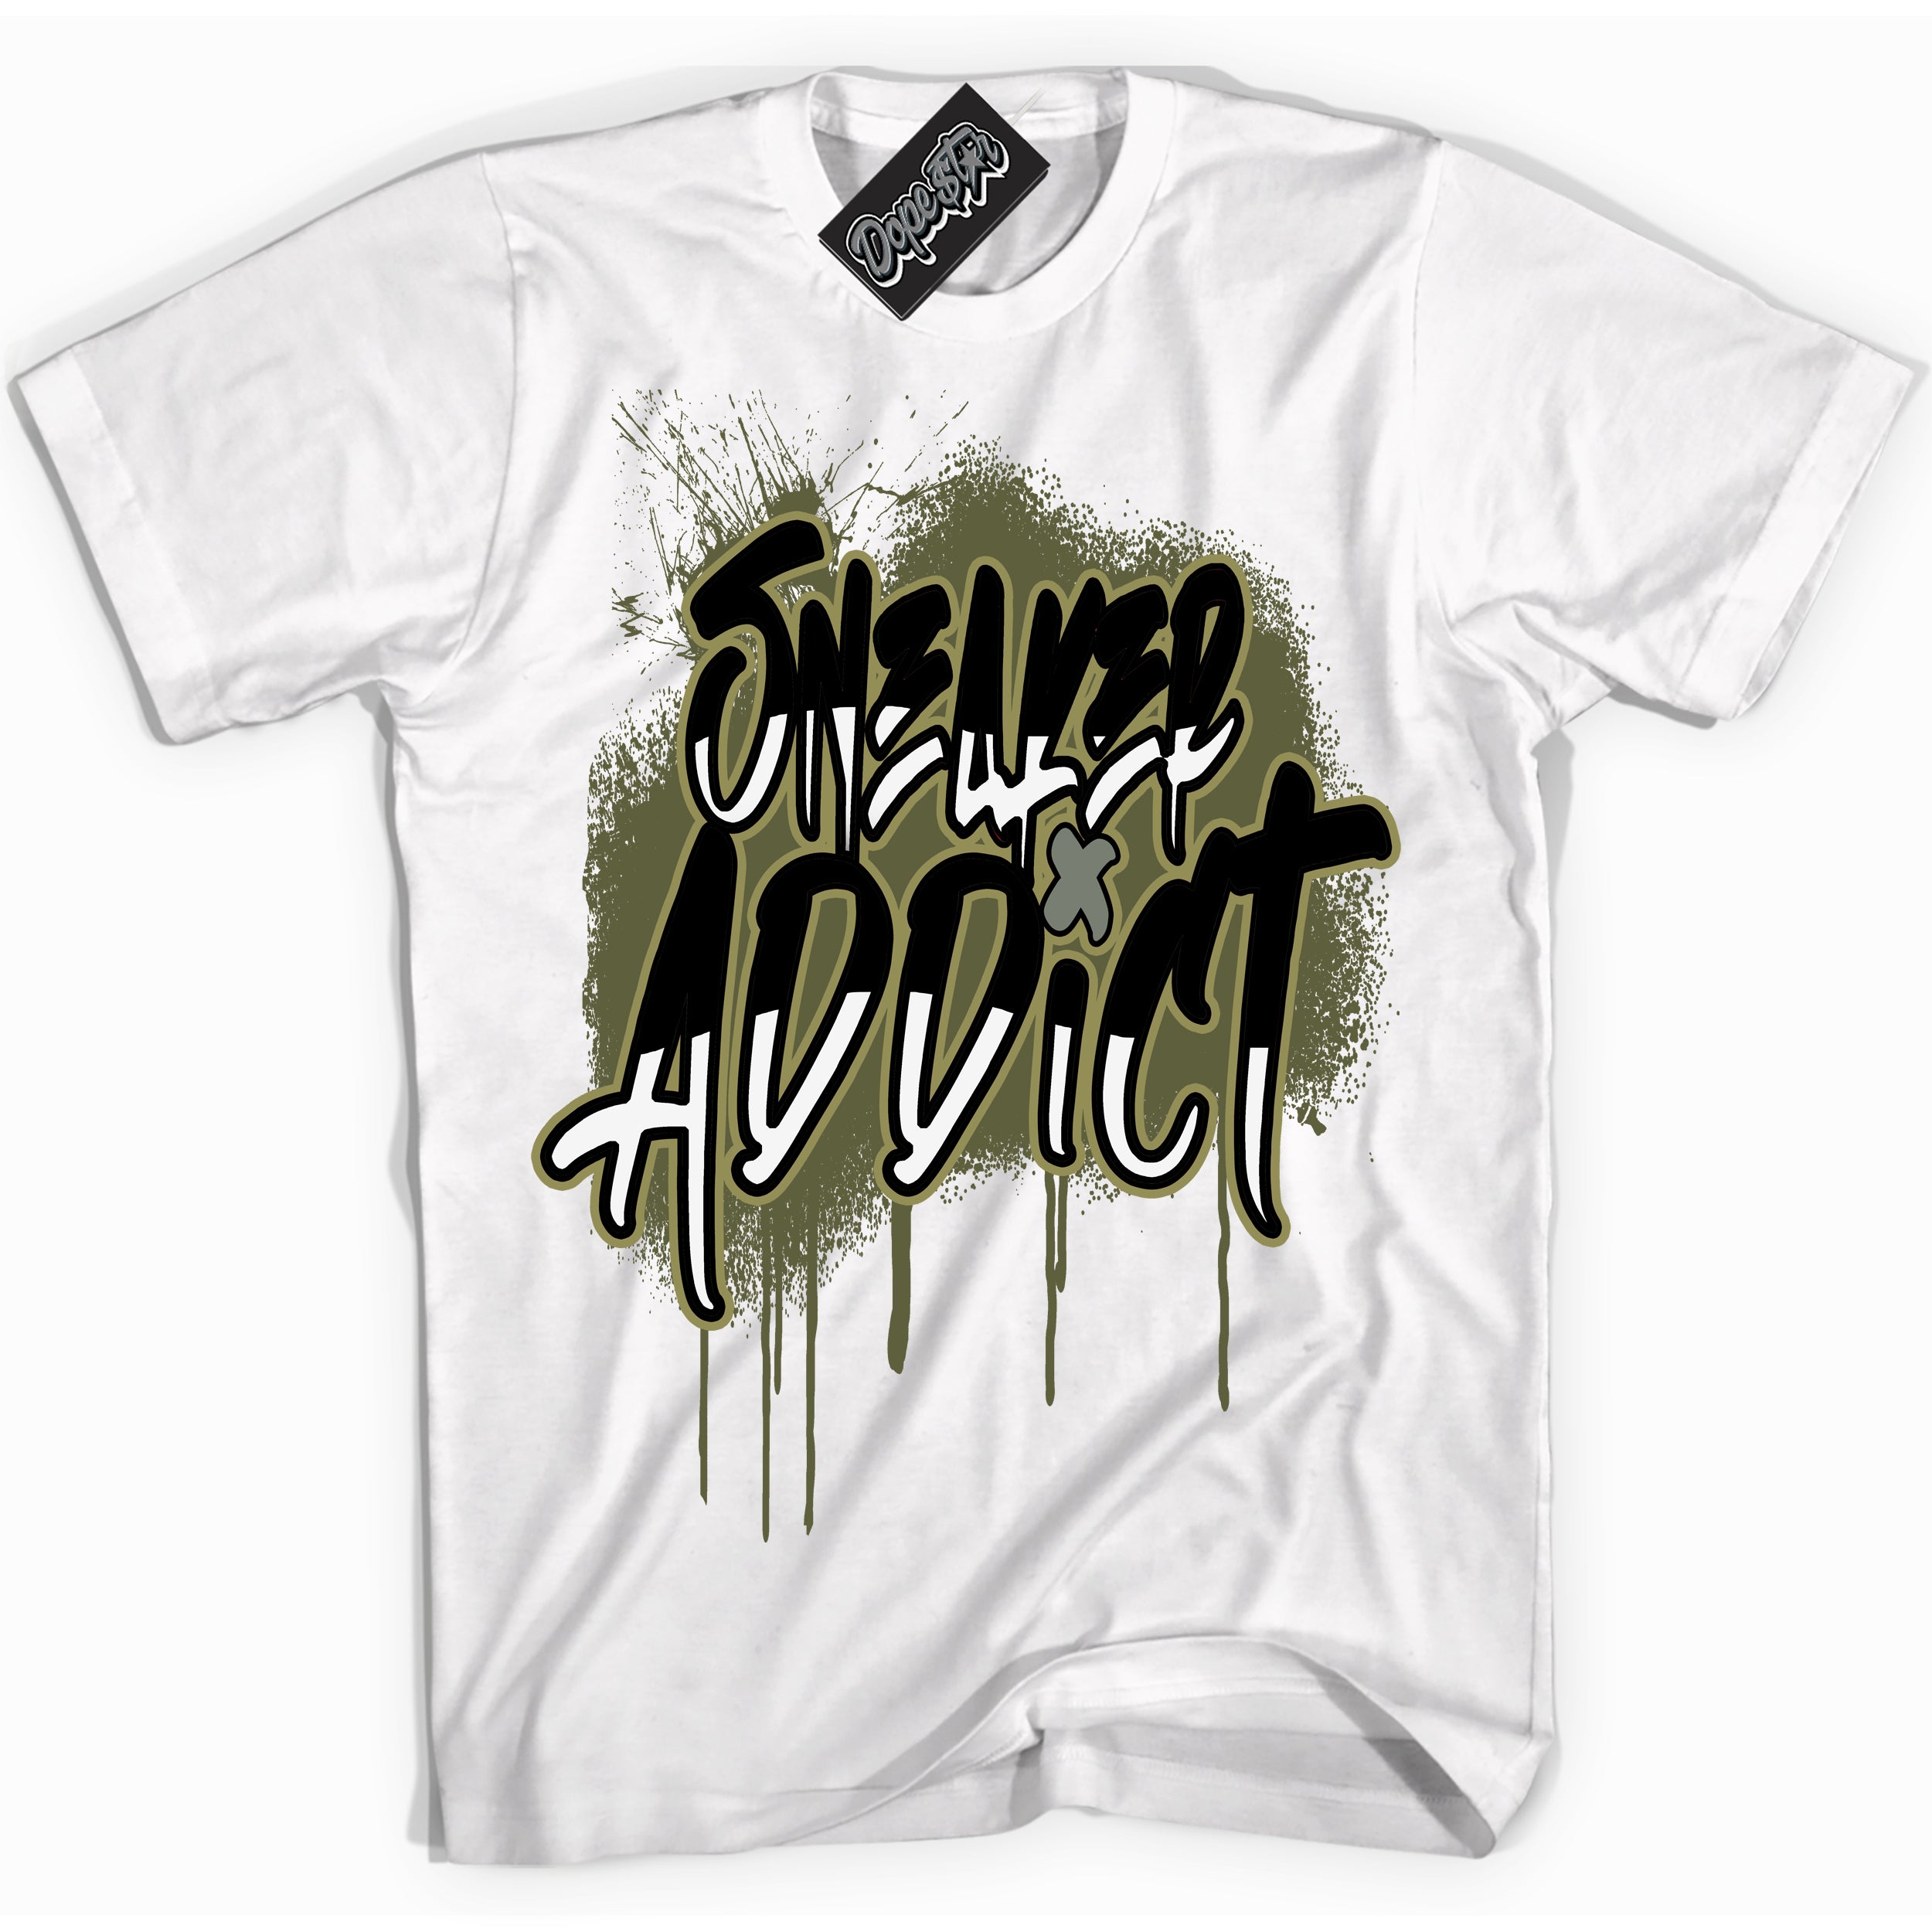 Cool White graphic tee with “ Sneaker Addict ” print, that perfectly matches Craft Olive 4s sneakers 